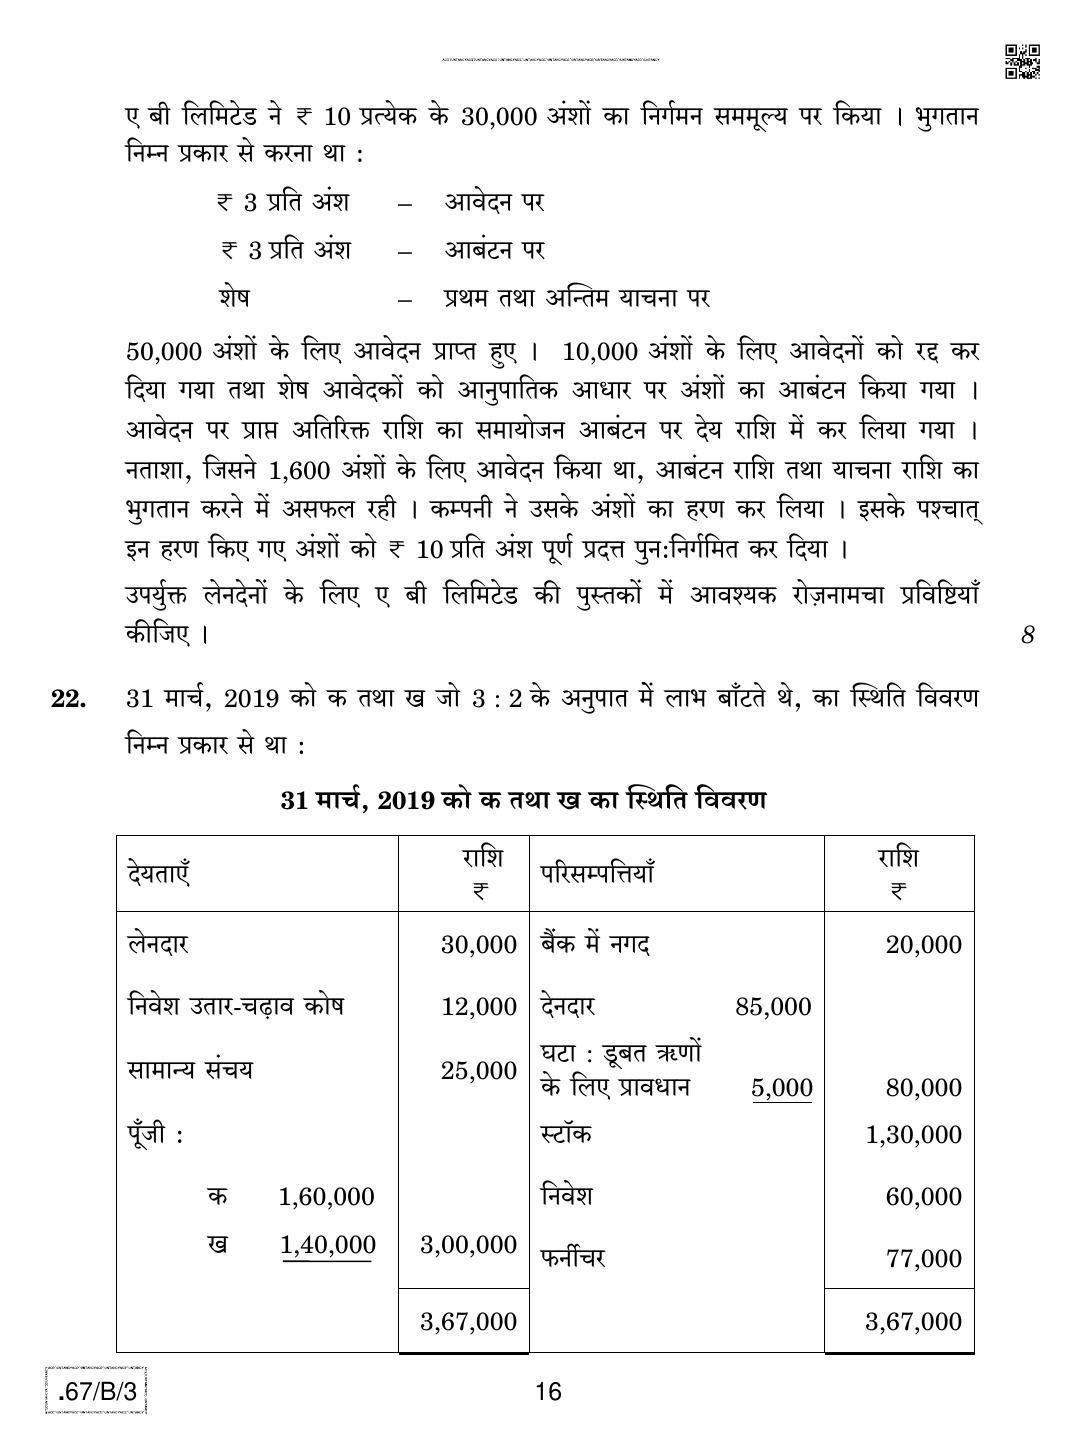 CBSE Class 12 67-C-3 - Accountancy 2020 Compartment Question Paper - Page 16